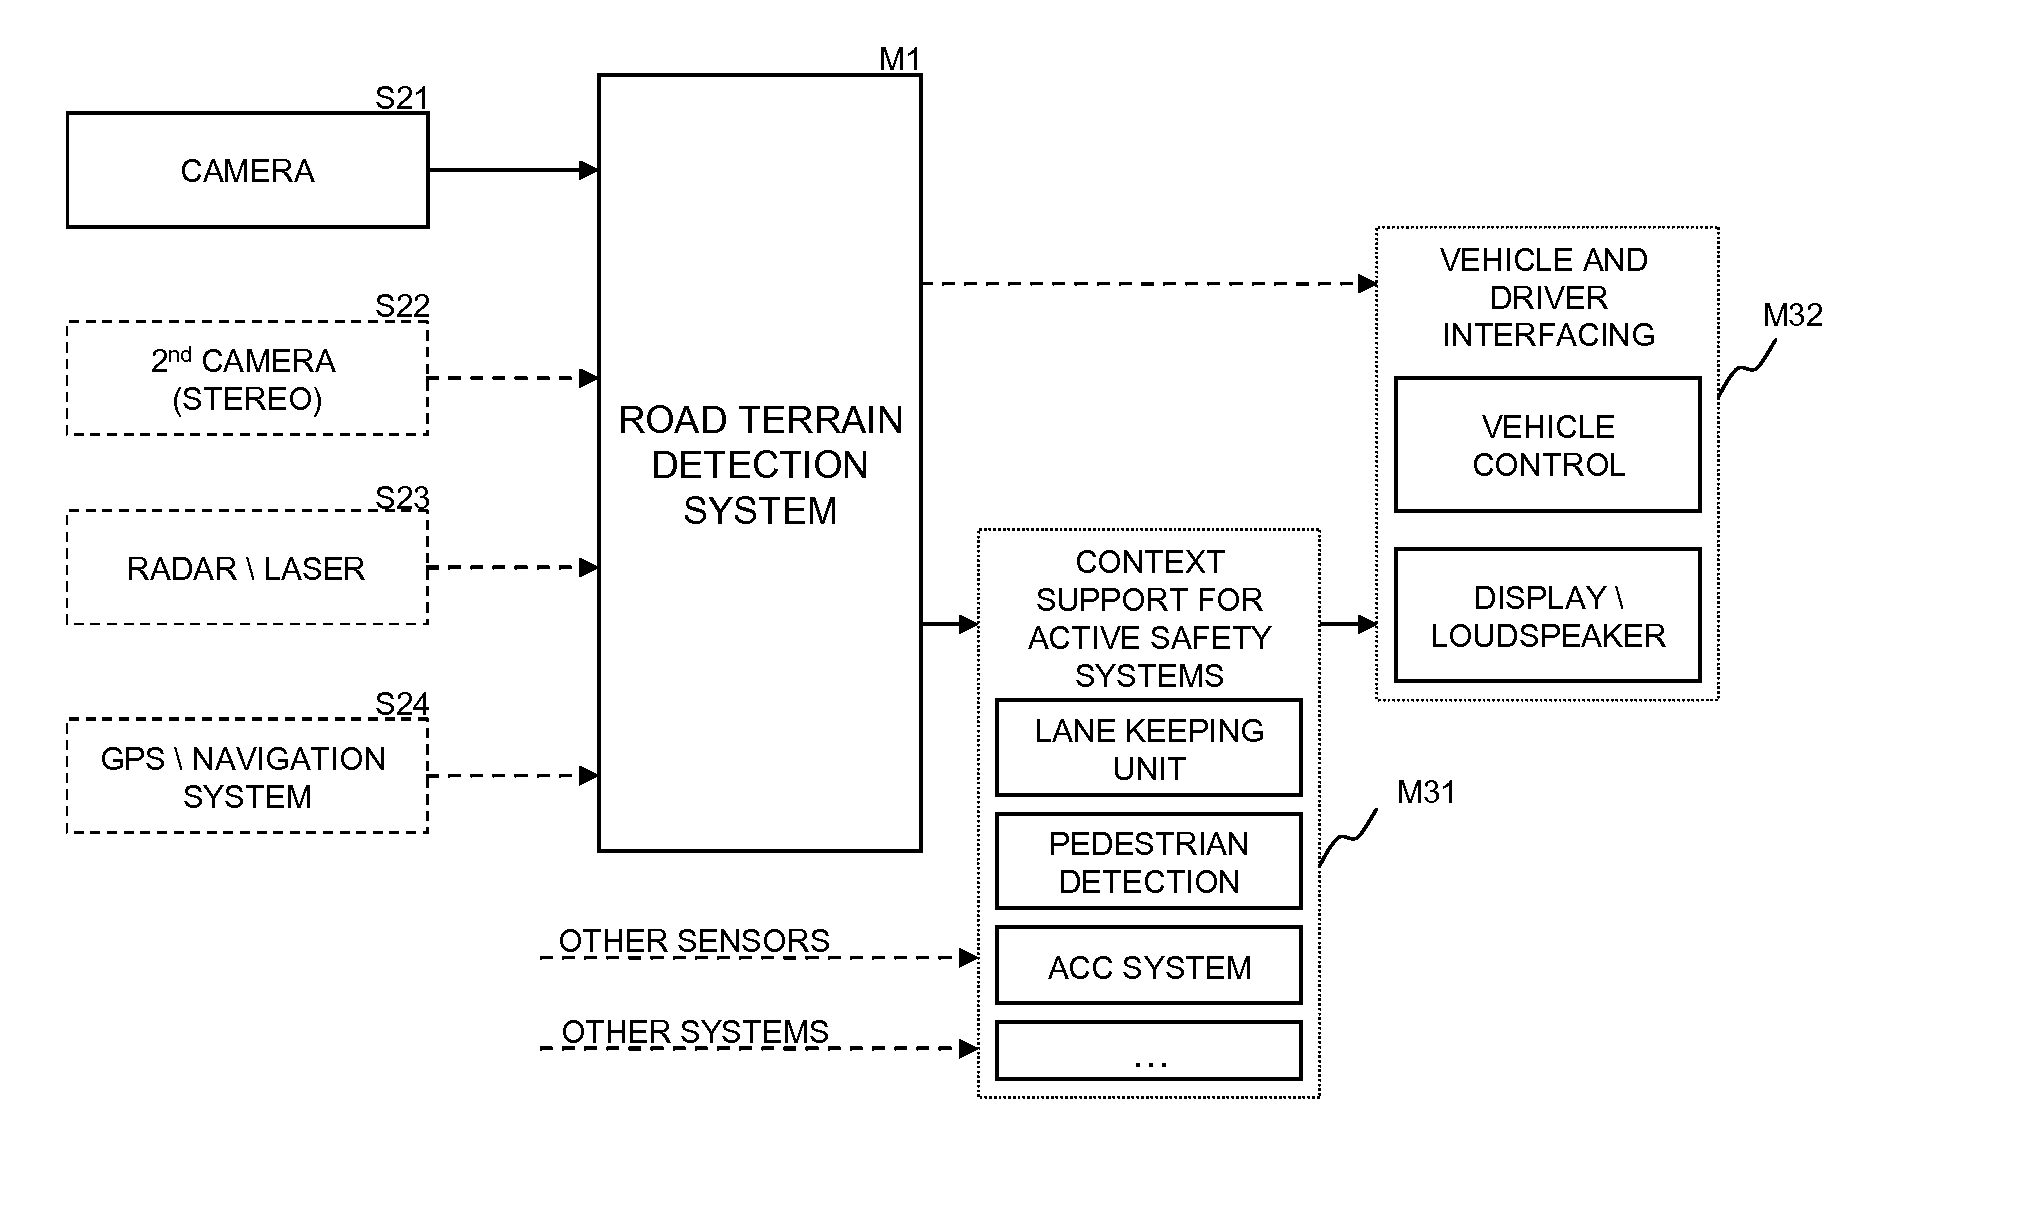 Road-terrain detection method and system for driver assistance systems